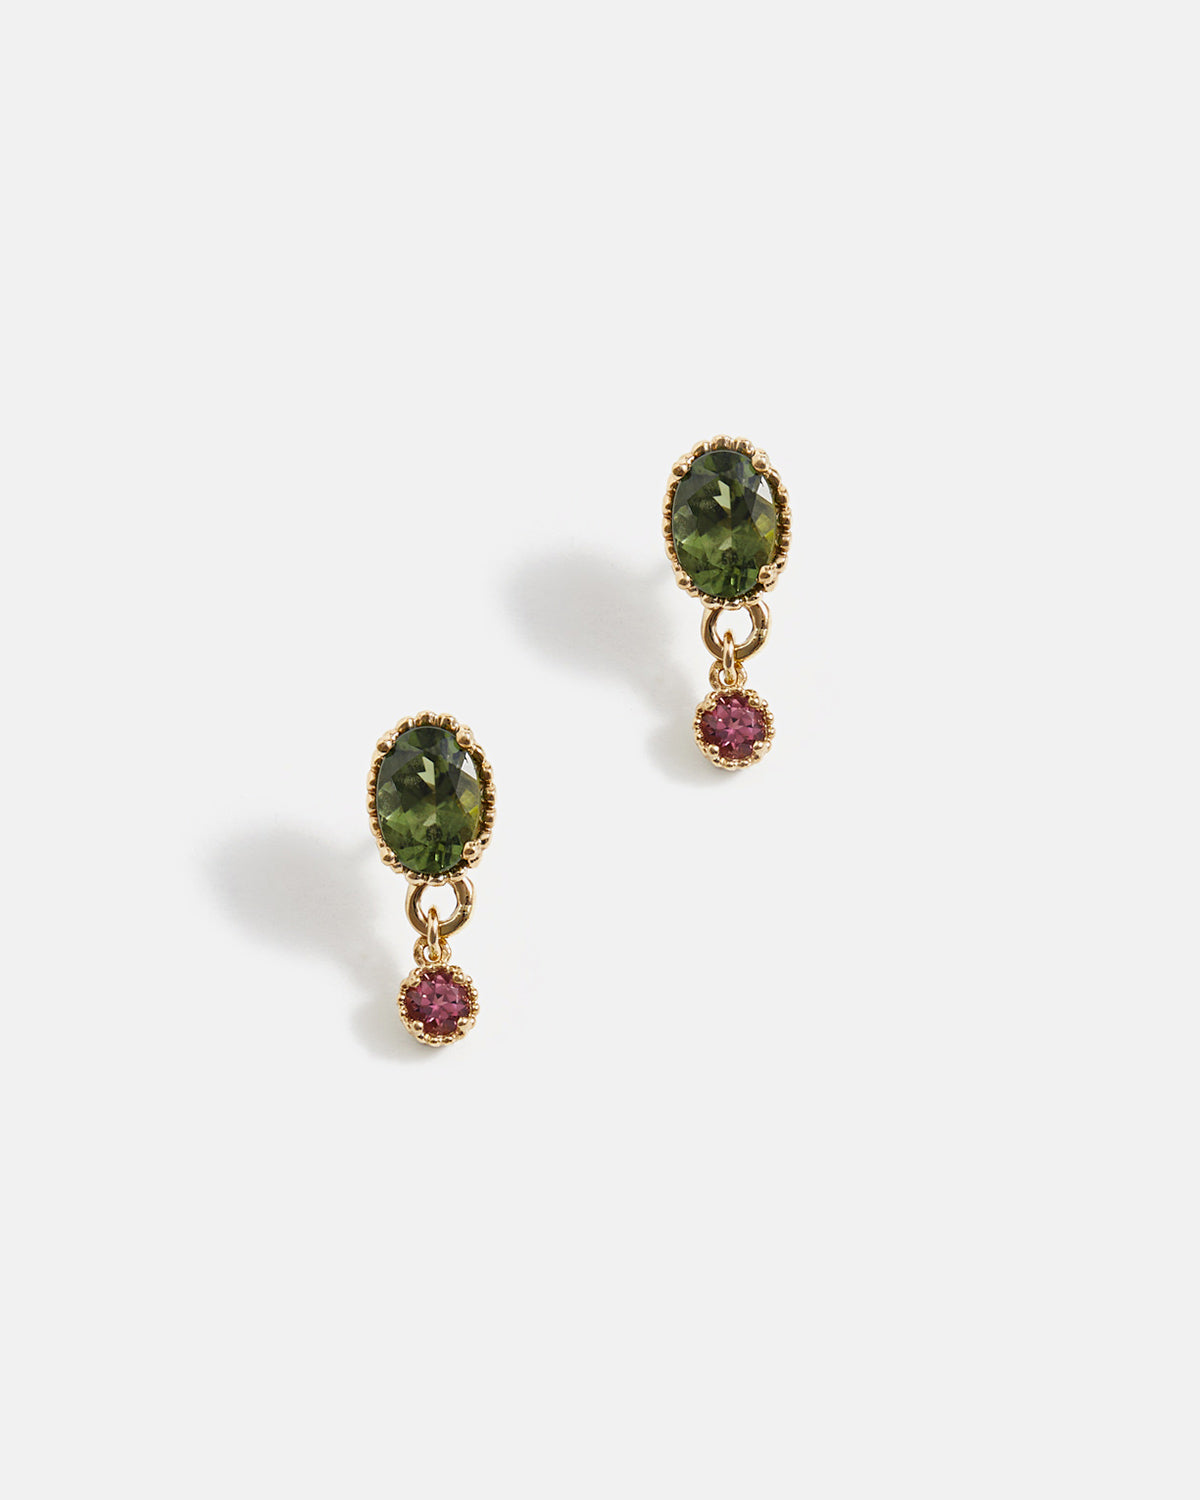 Galatée Earrings in Yellow Gold with Green Tashmarines and Pink Tourmalines